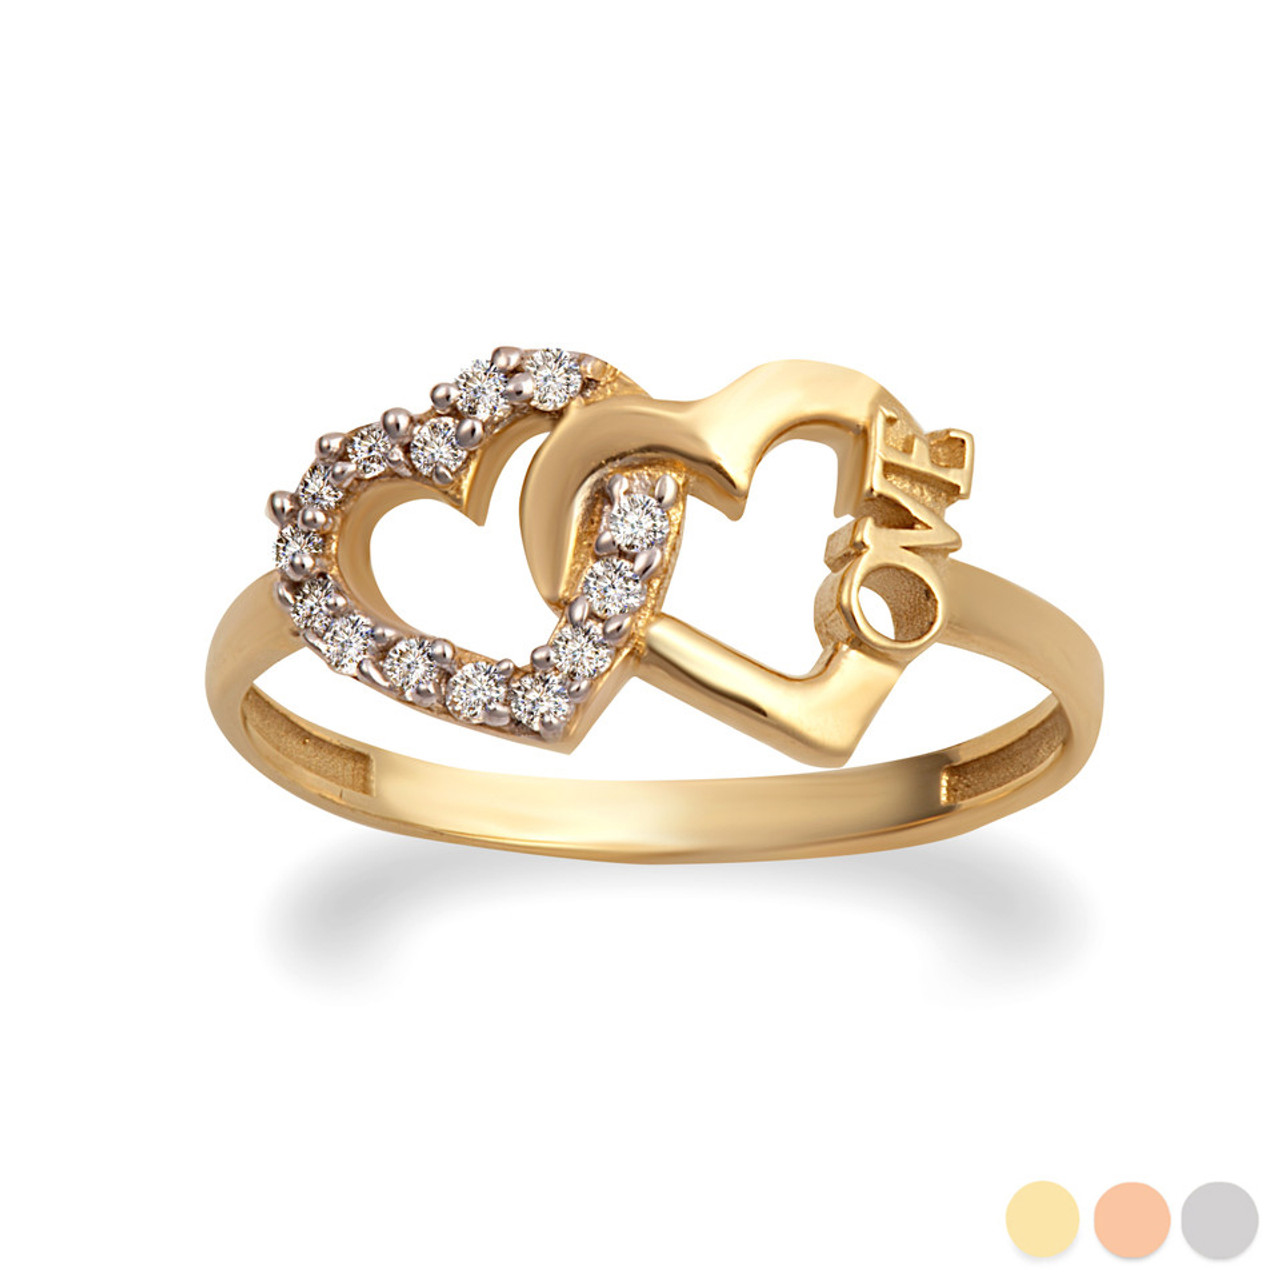 Heart Shape Gold Ring Design | 14k Gold Jewelry Heart Ring | Ring Plated Gold  Heart - Rings - Aliexpress